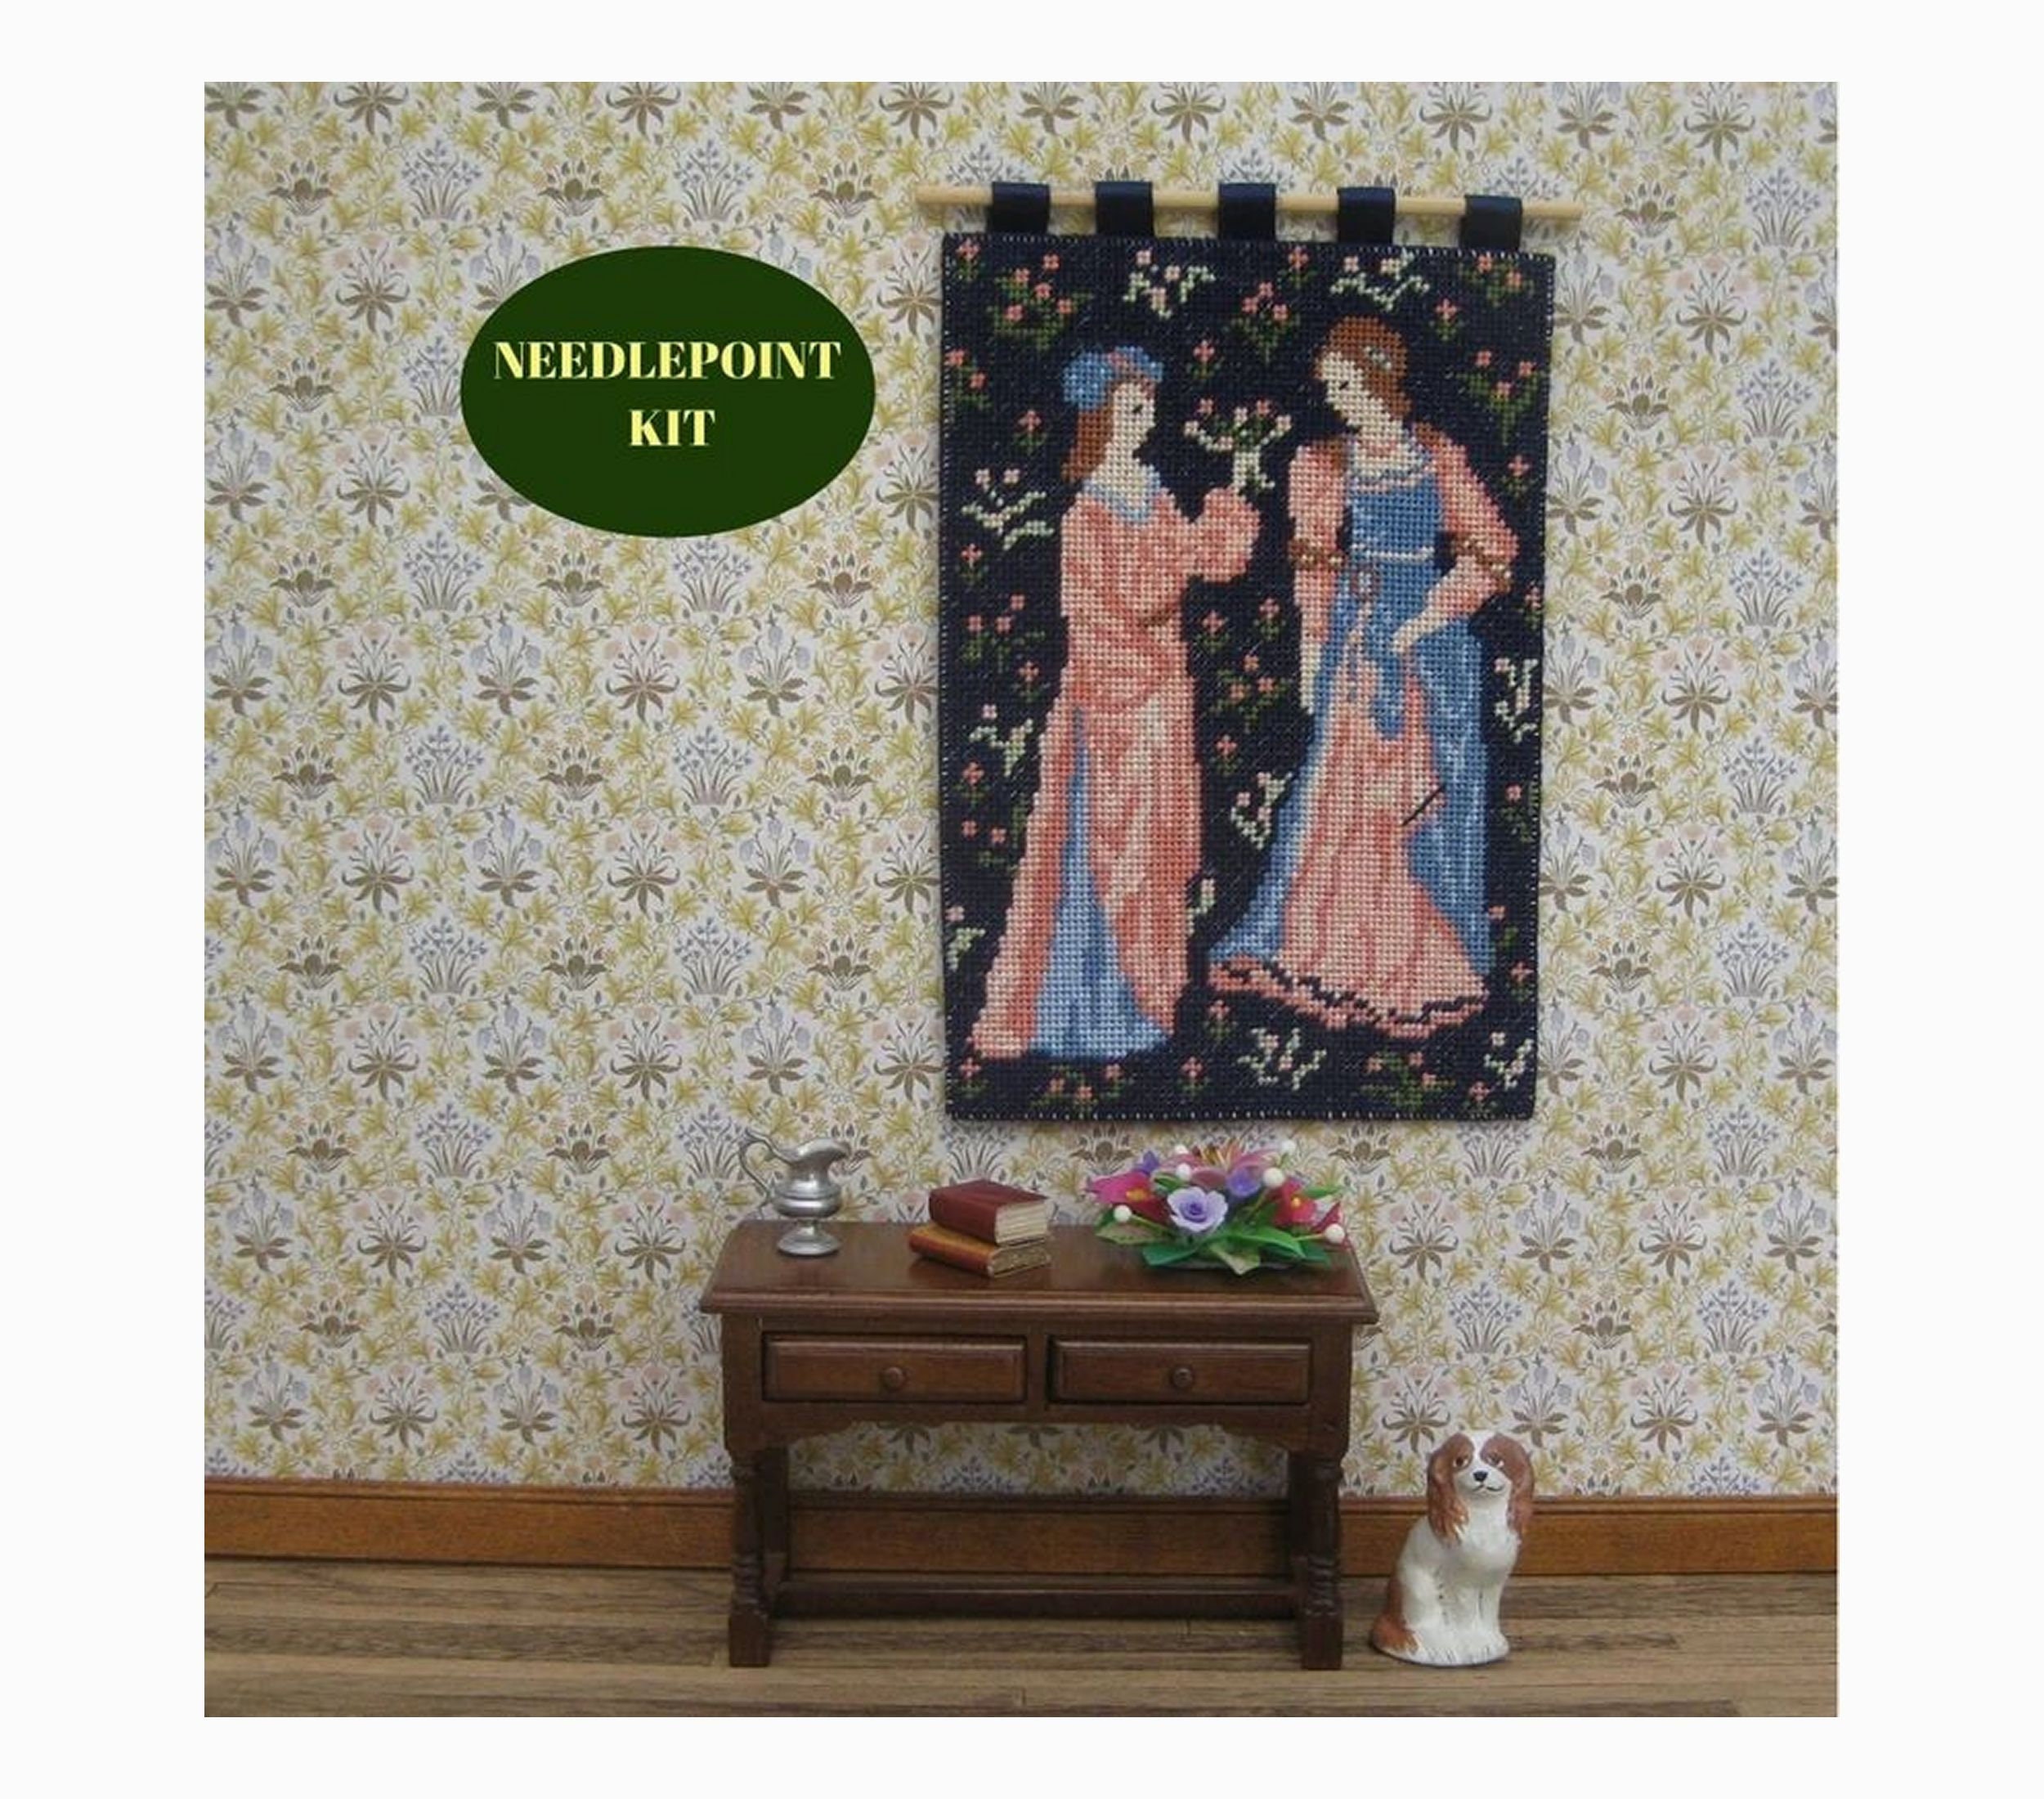 Sweet Peas, Petit Point, Kit, Needlepoint, Cushion, Picture, Historical,  Small, Easy, Birthday, Craft, Scottish, Counted, Charted, Floral 